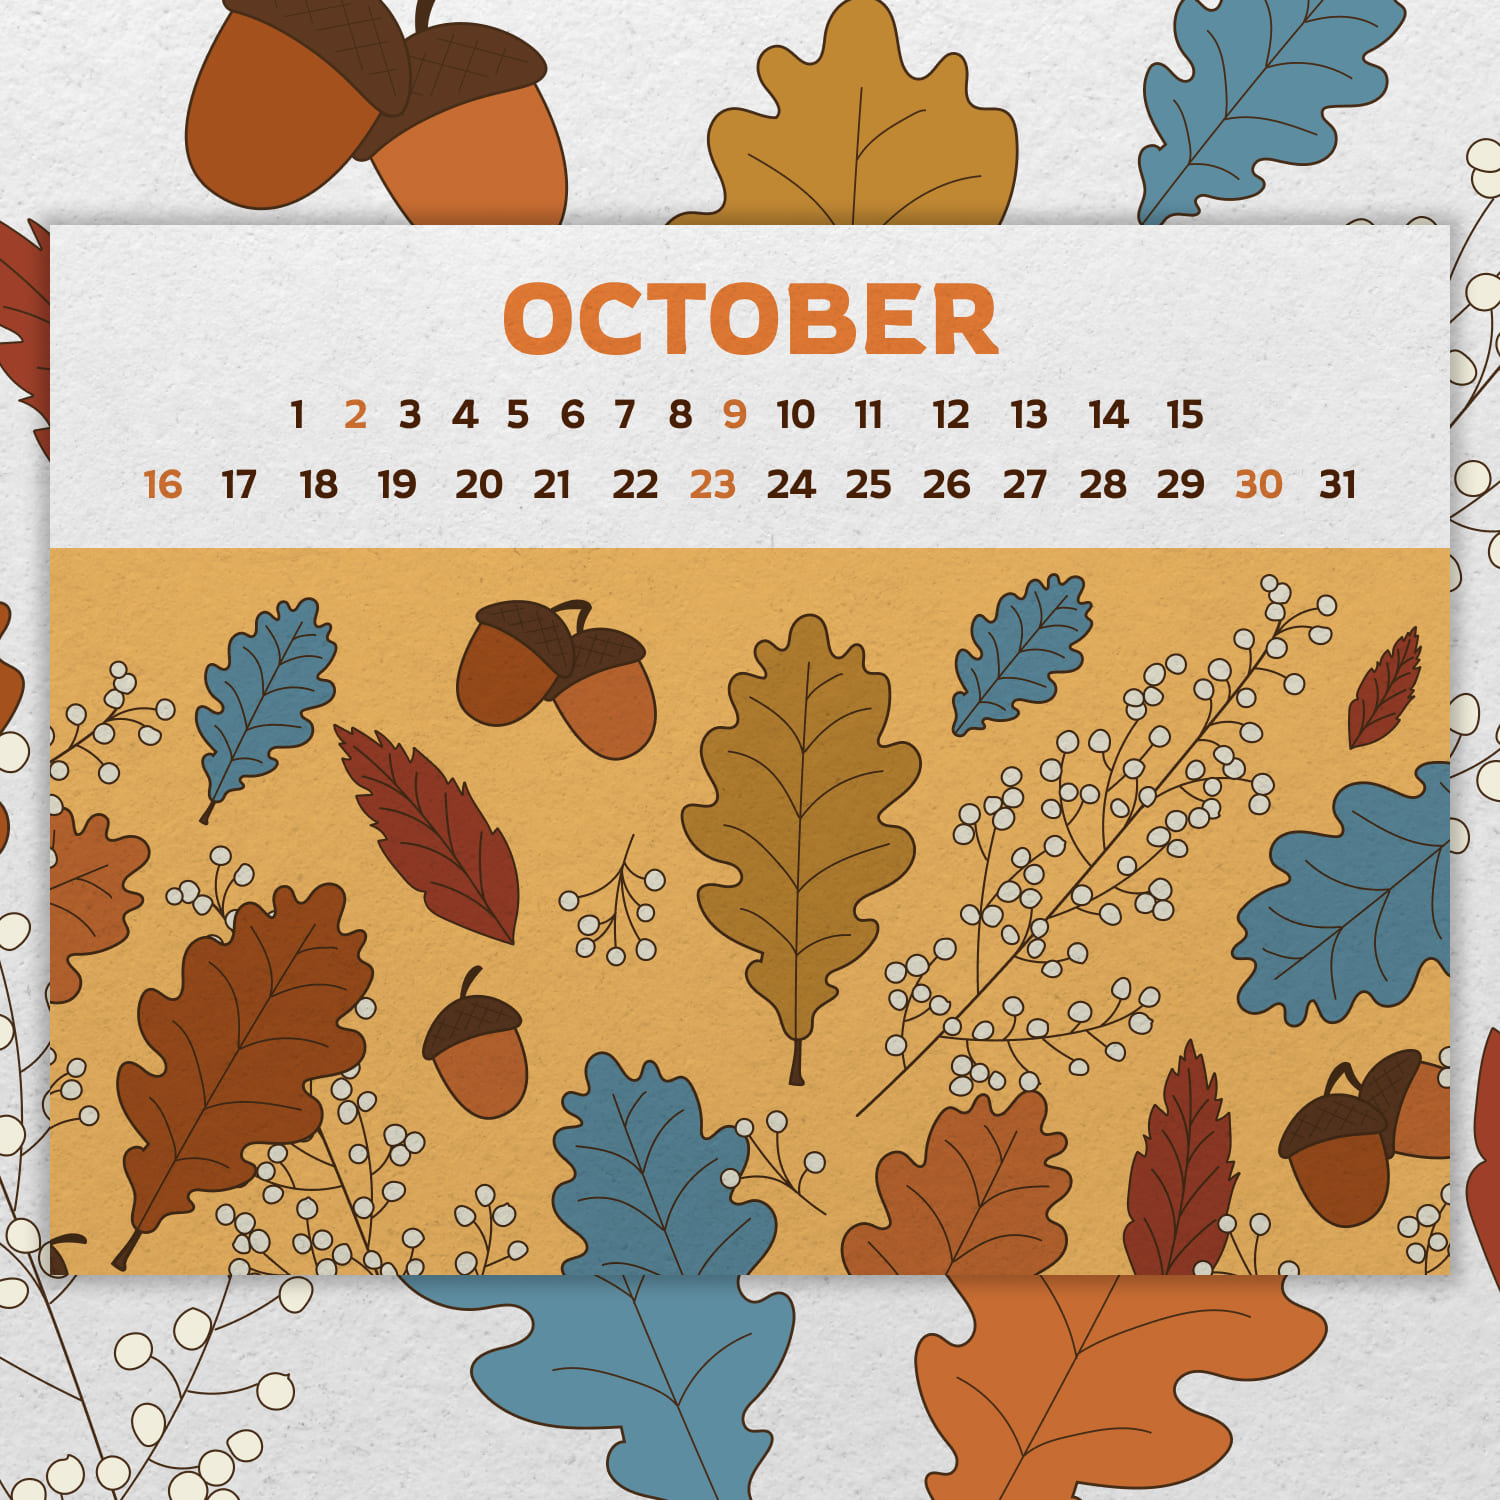 Free Calendar October Acorns and Leaves cover image.